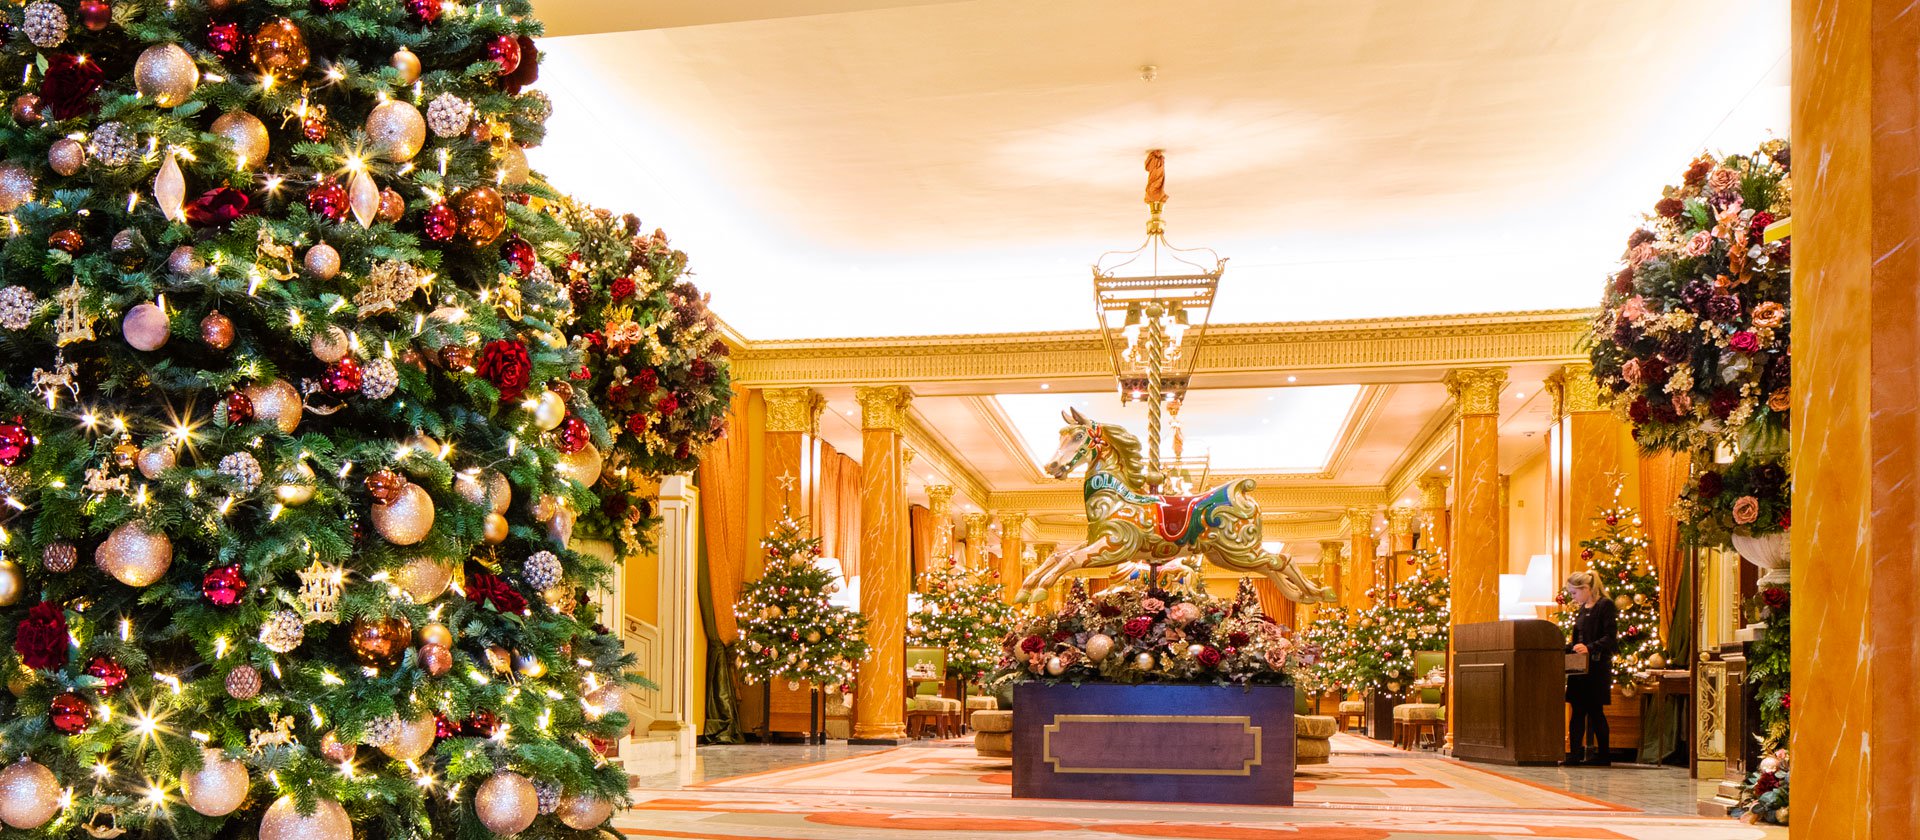 A Mary Poppins-esque Christmas at The Dorchester Hotel, London